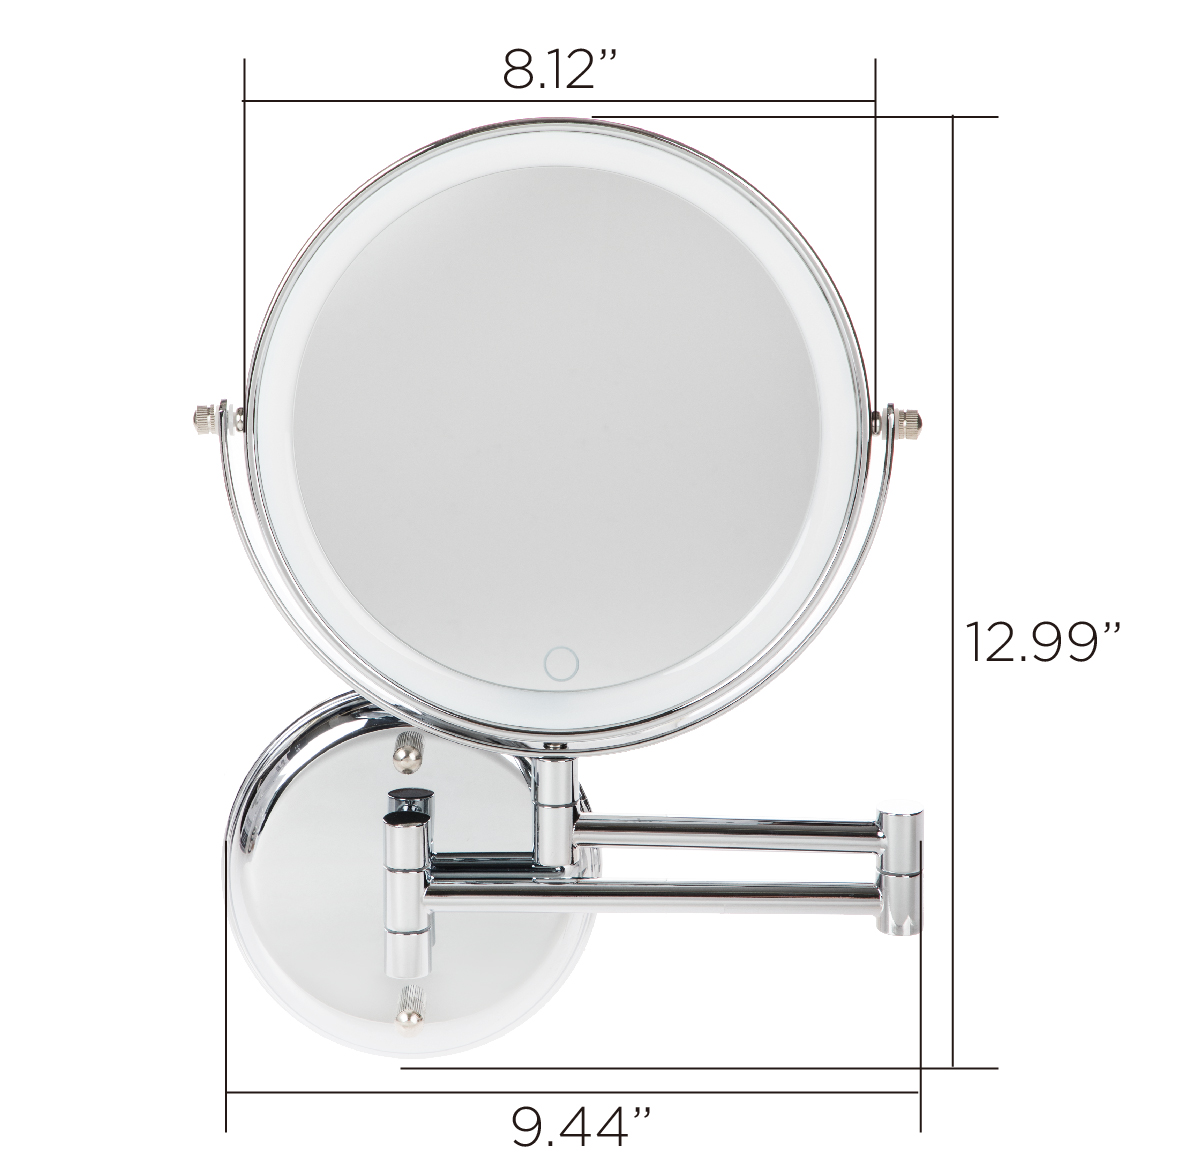 Better Homes & Gardens Modern Round 8 inch Wall Mount LED Mirror - Chrome - image 2 of 11